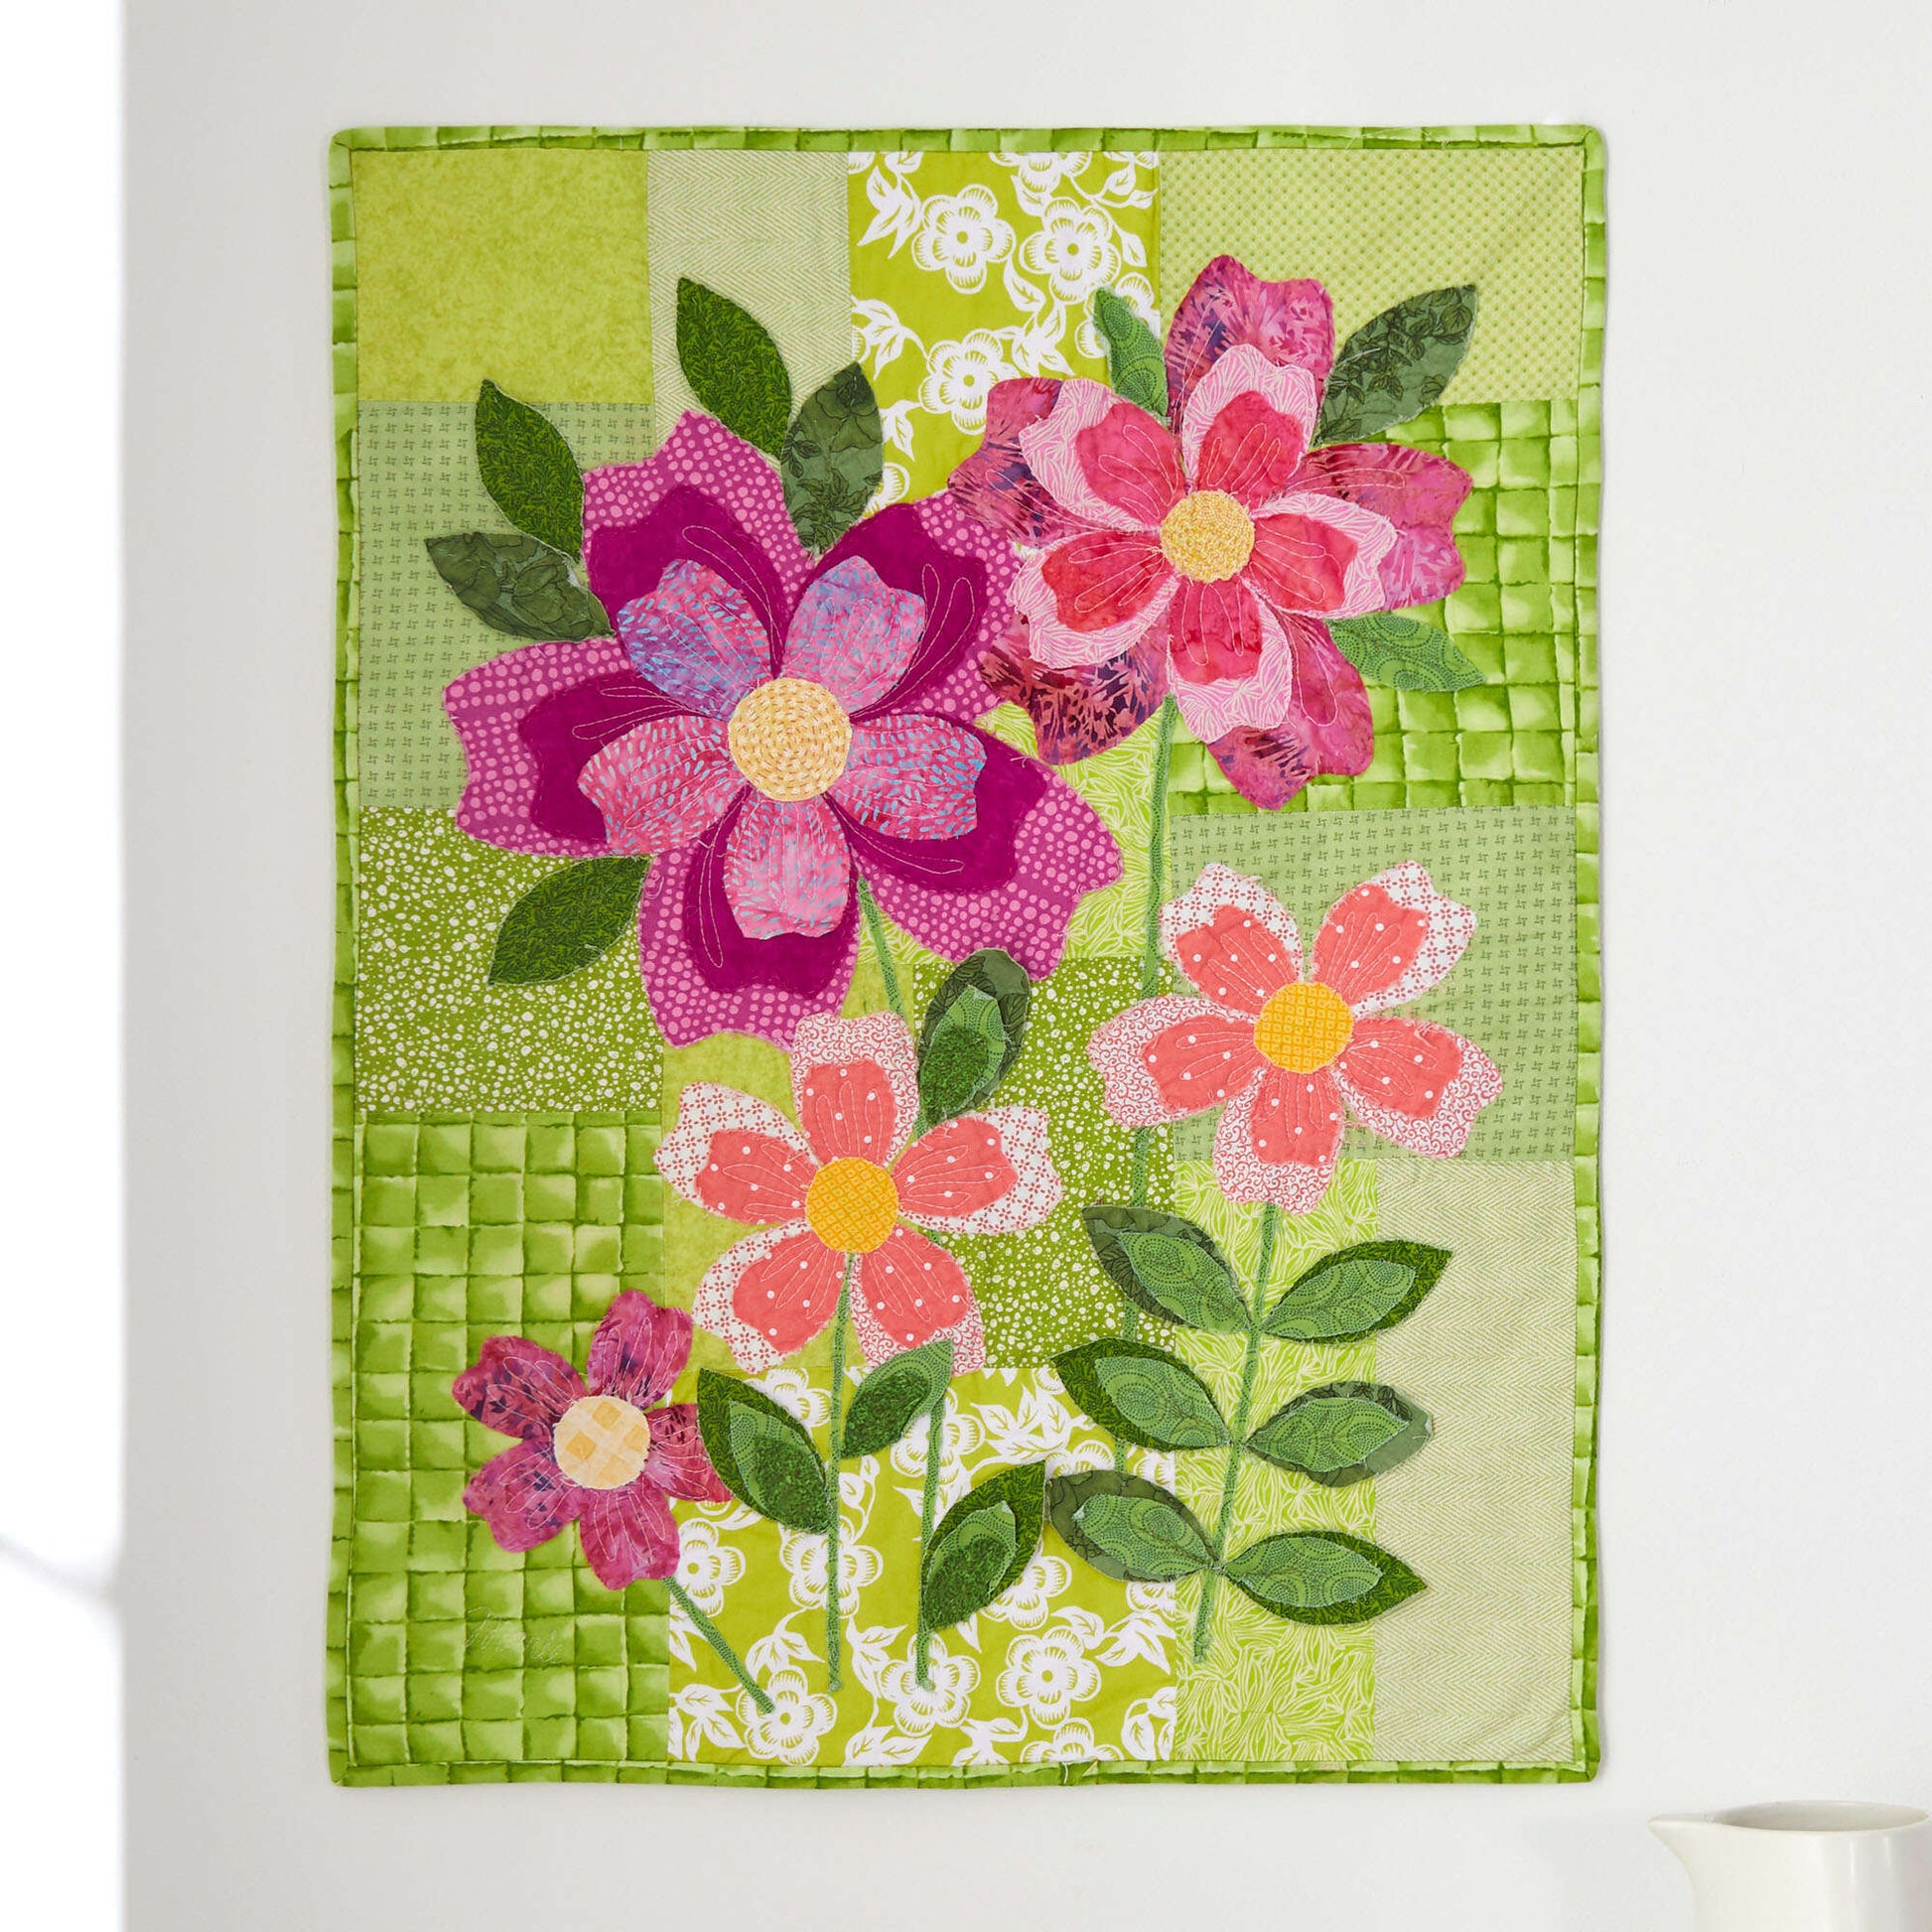 Free Coats & Clark Sewing Flower Wall Hanging Pattern